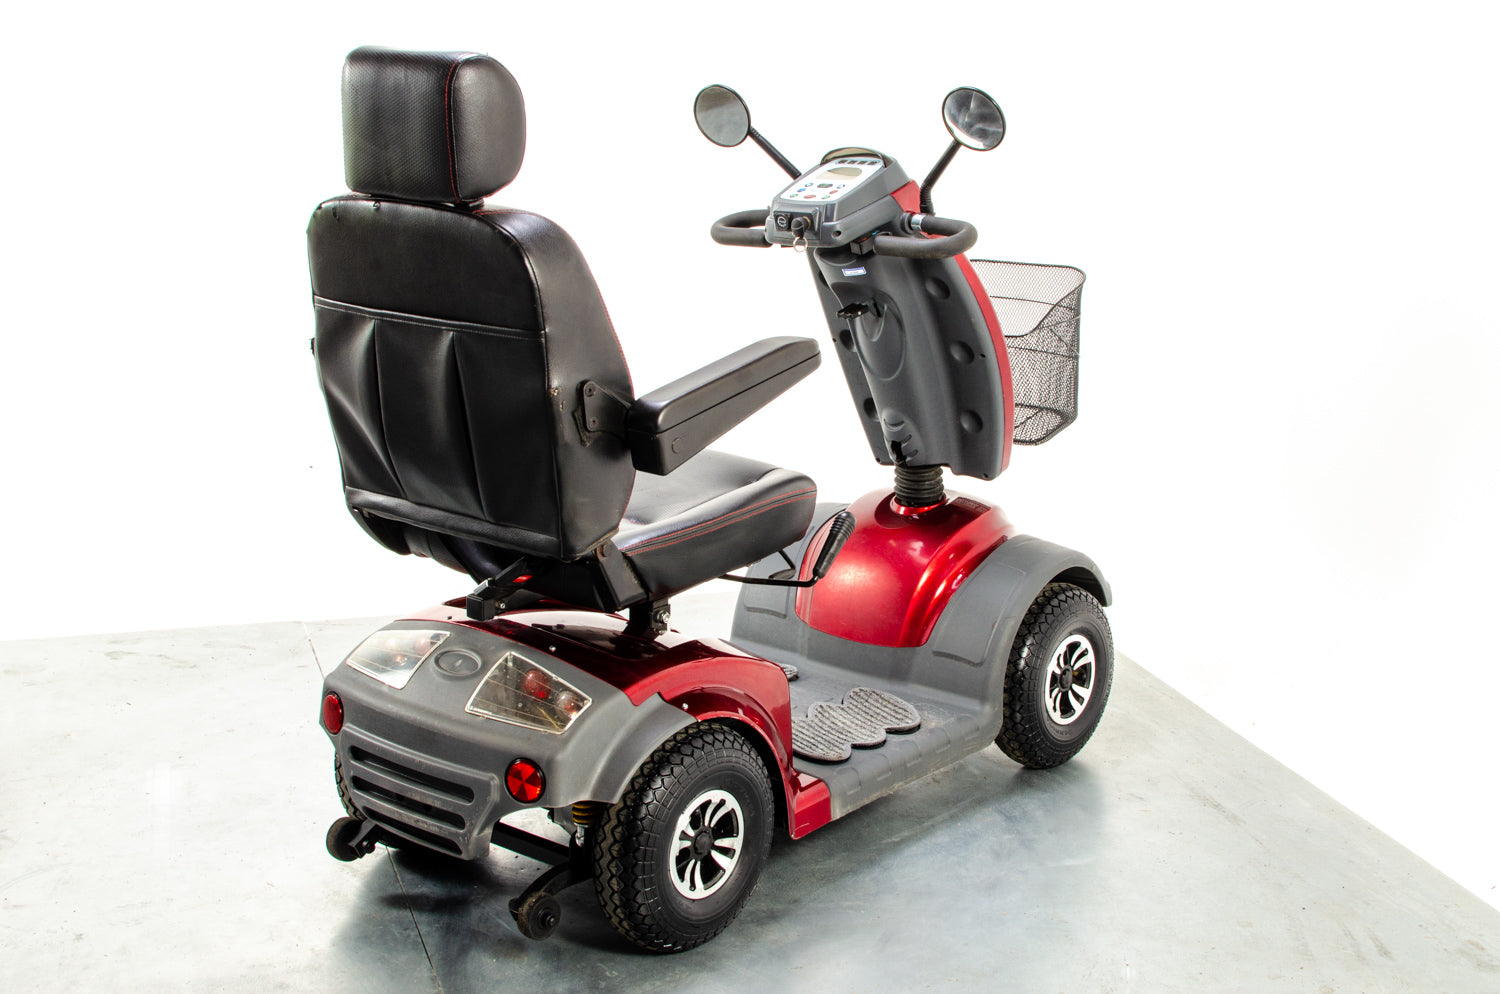 TGA Mystere Used Mobility Scooter Comfy 8mph Suspension Road All-Terrain